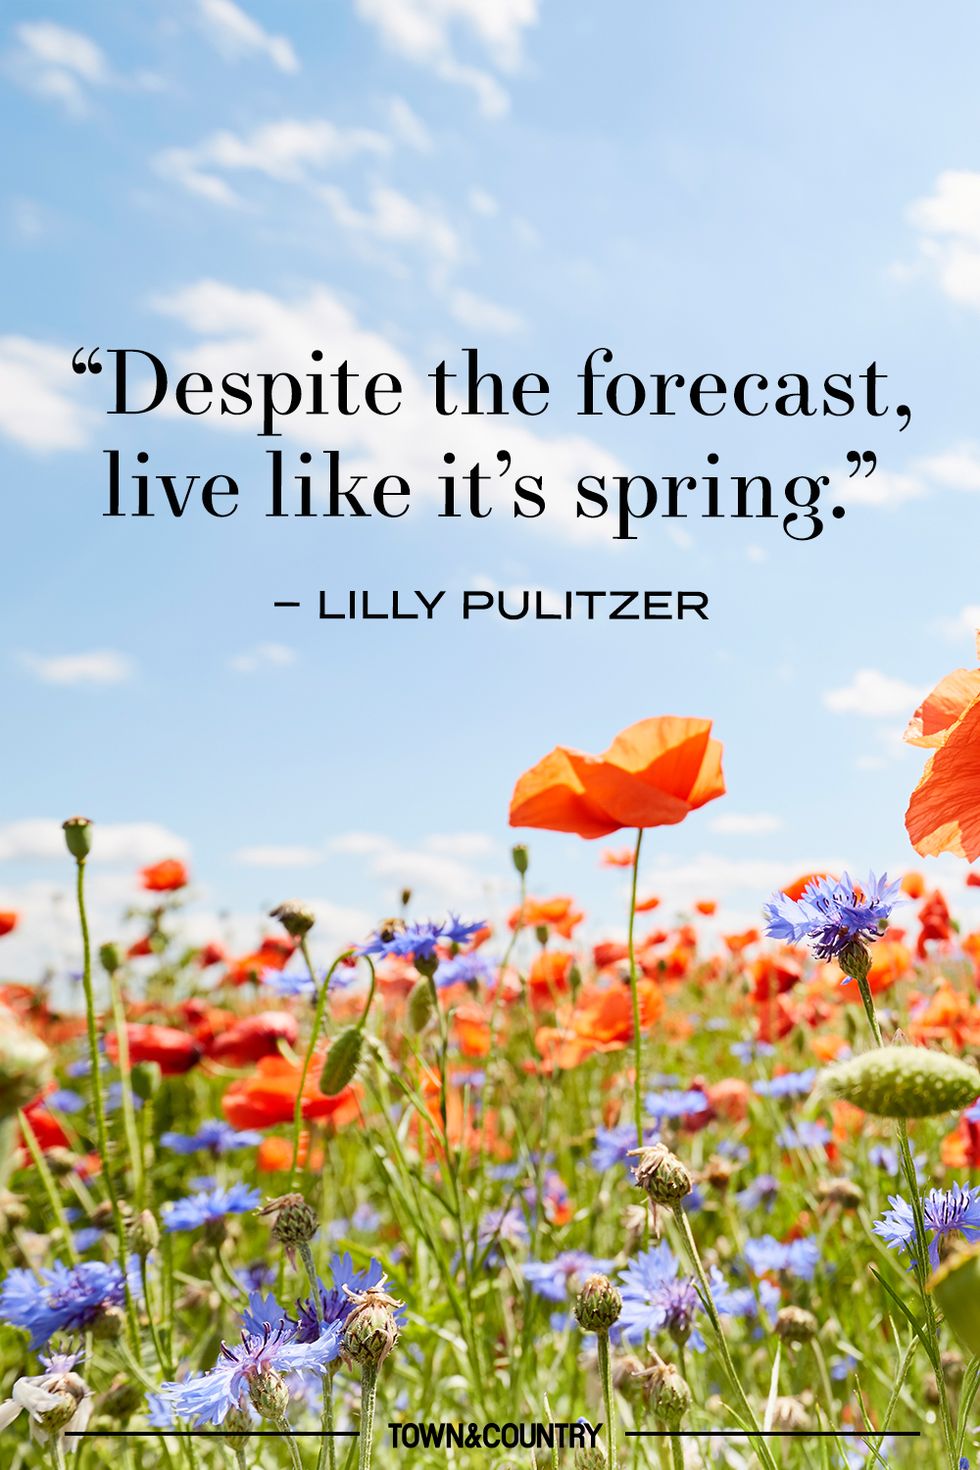 30+ Best Spring Quotes - Inspirational and Funny Sayings About Spring